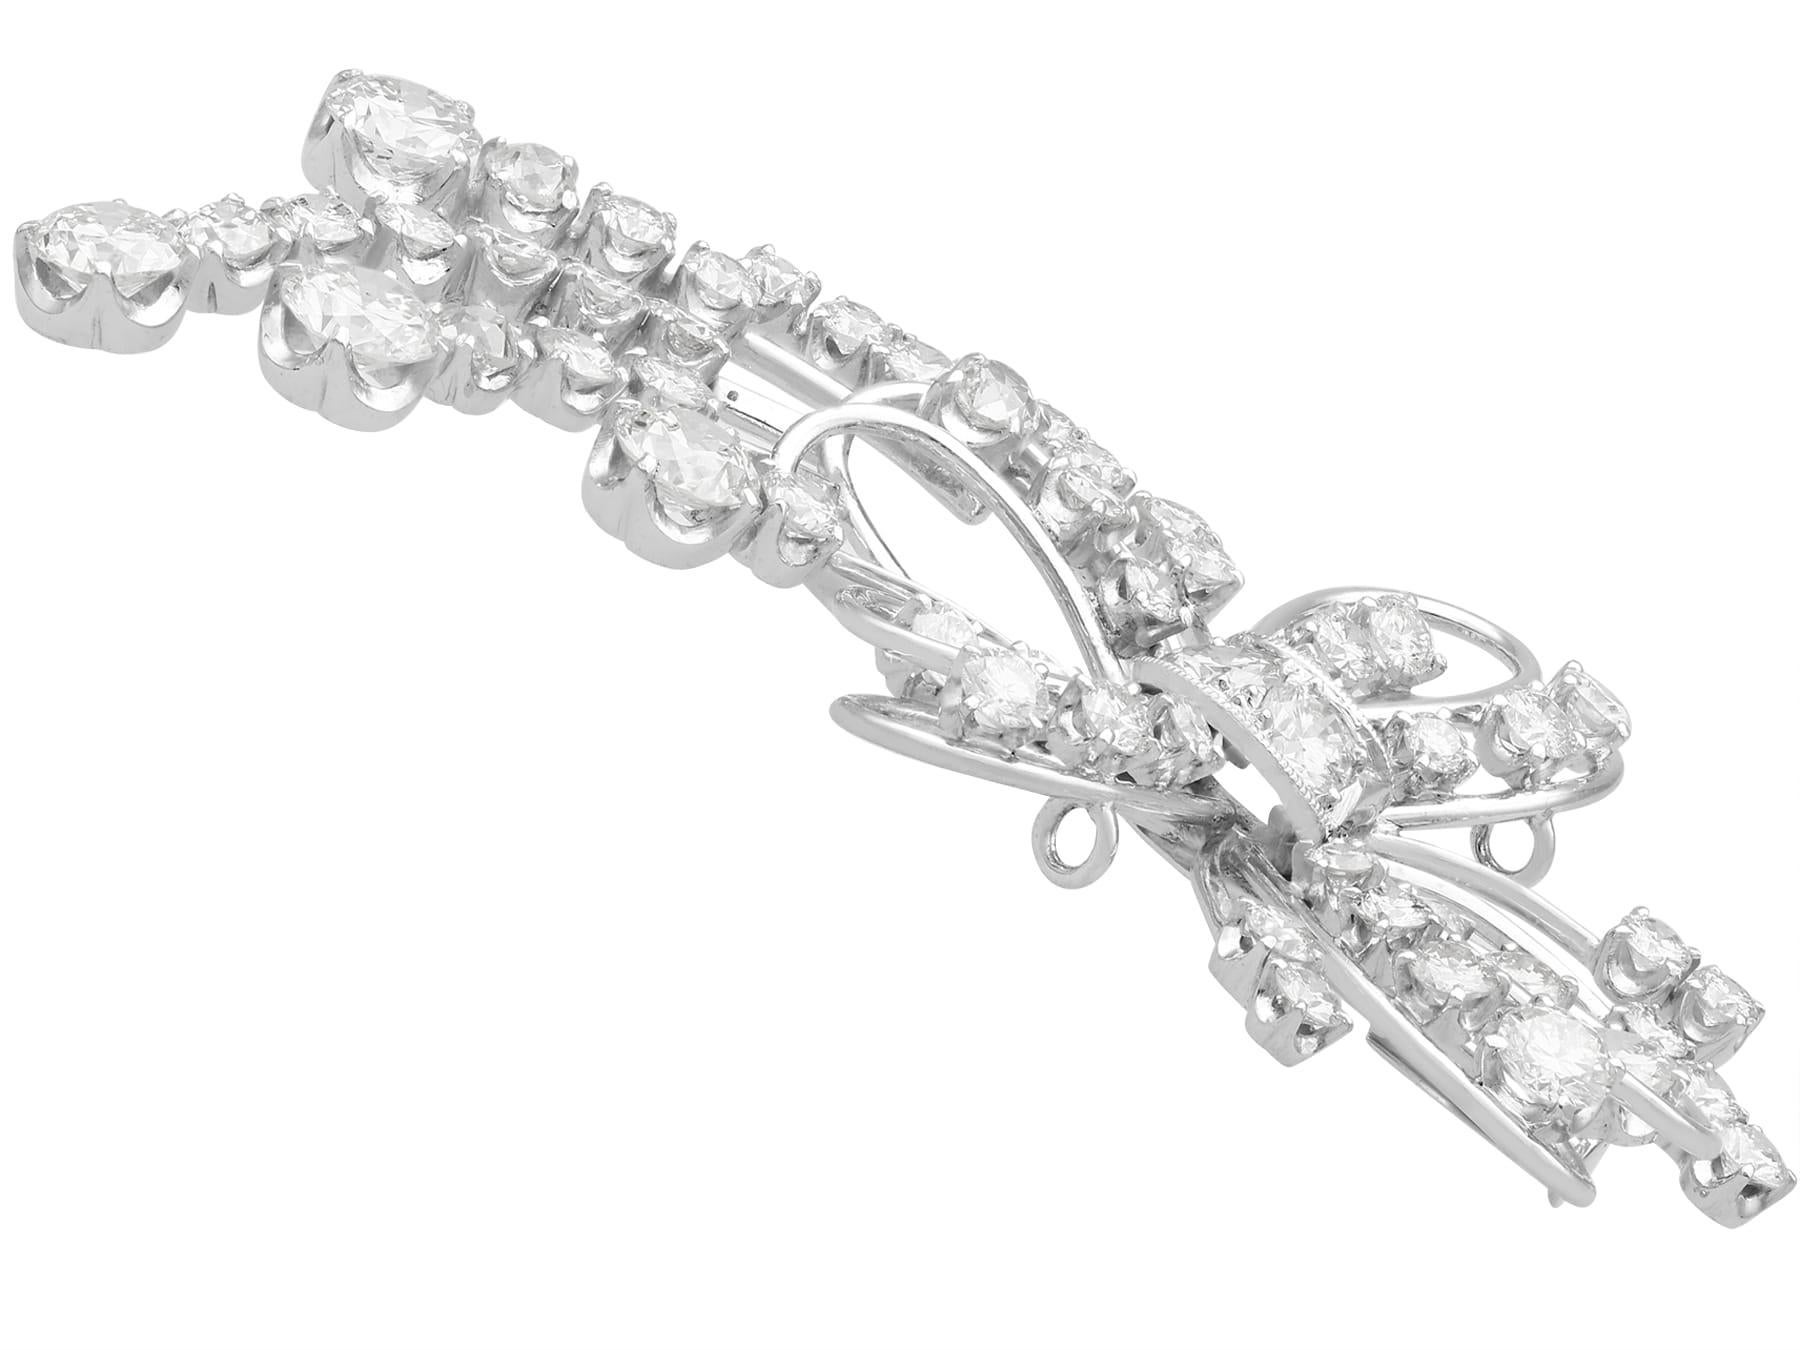 1940s 3.93 Carat Diamond and Platinum Spray Brooch In Excellent Condition For Sale In Jesmond, Newcastle Upon Tyne